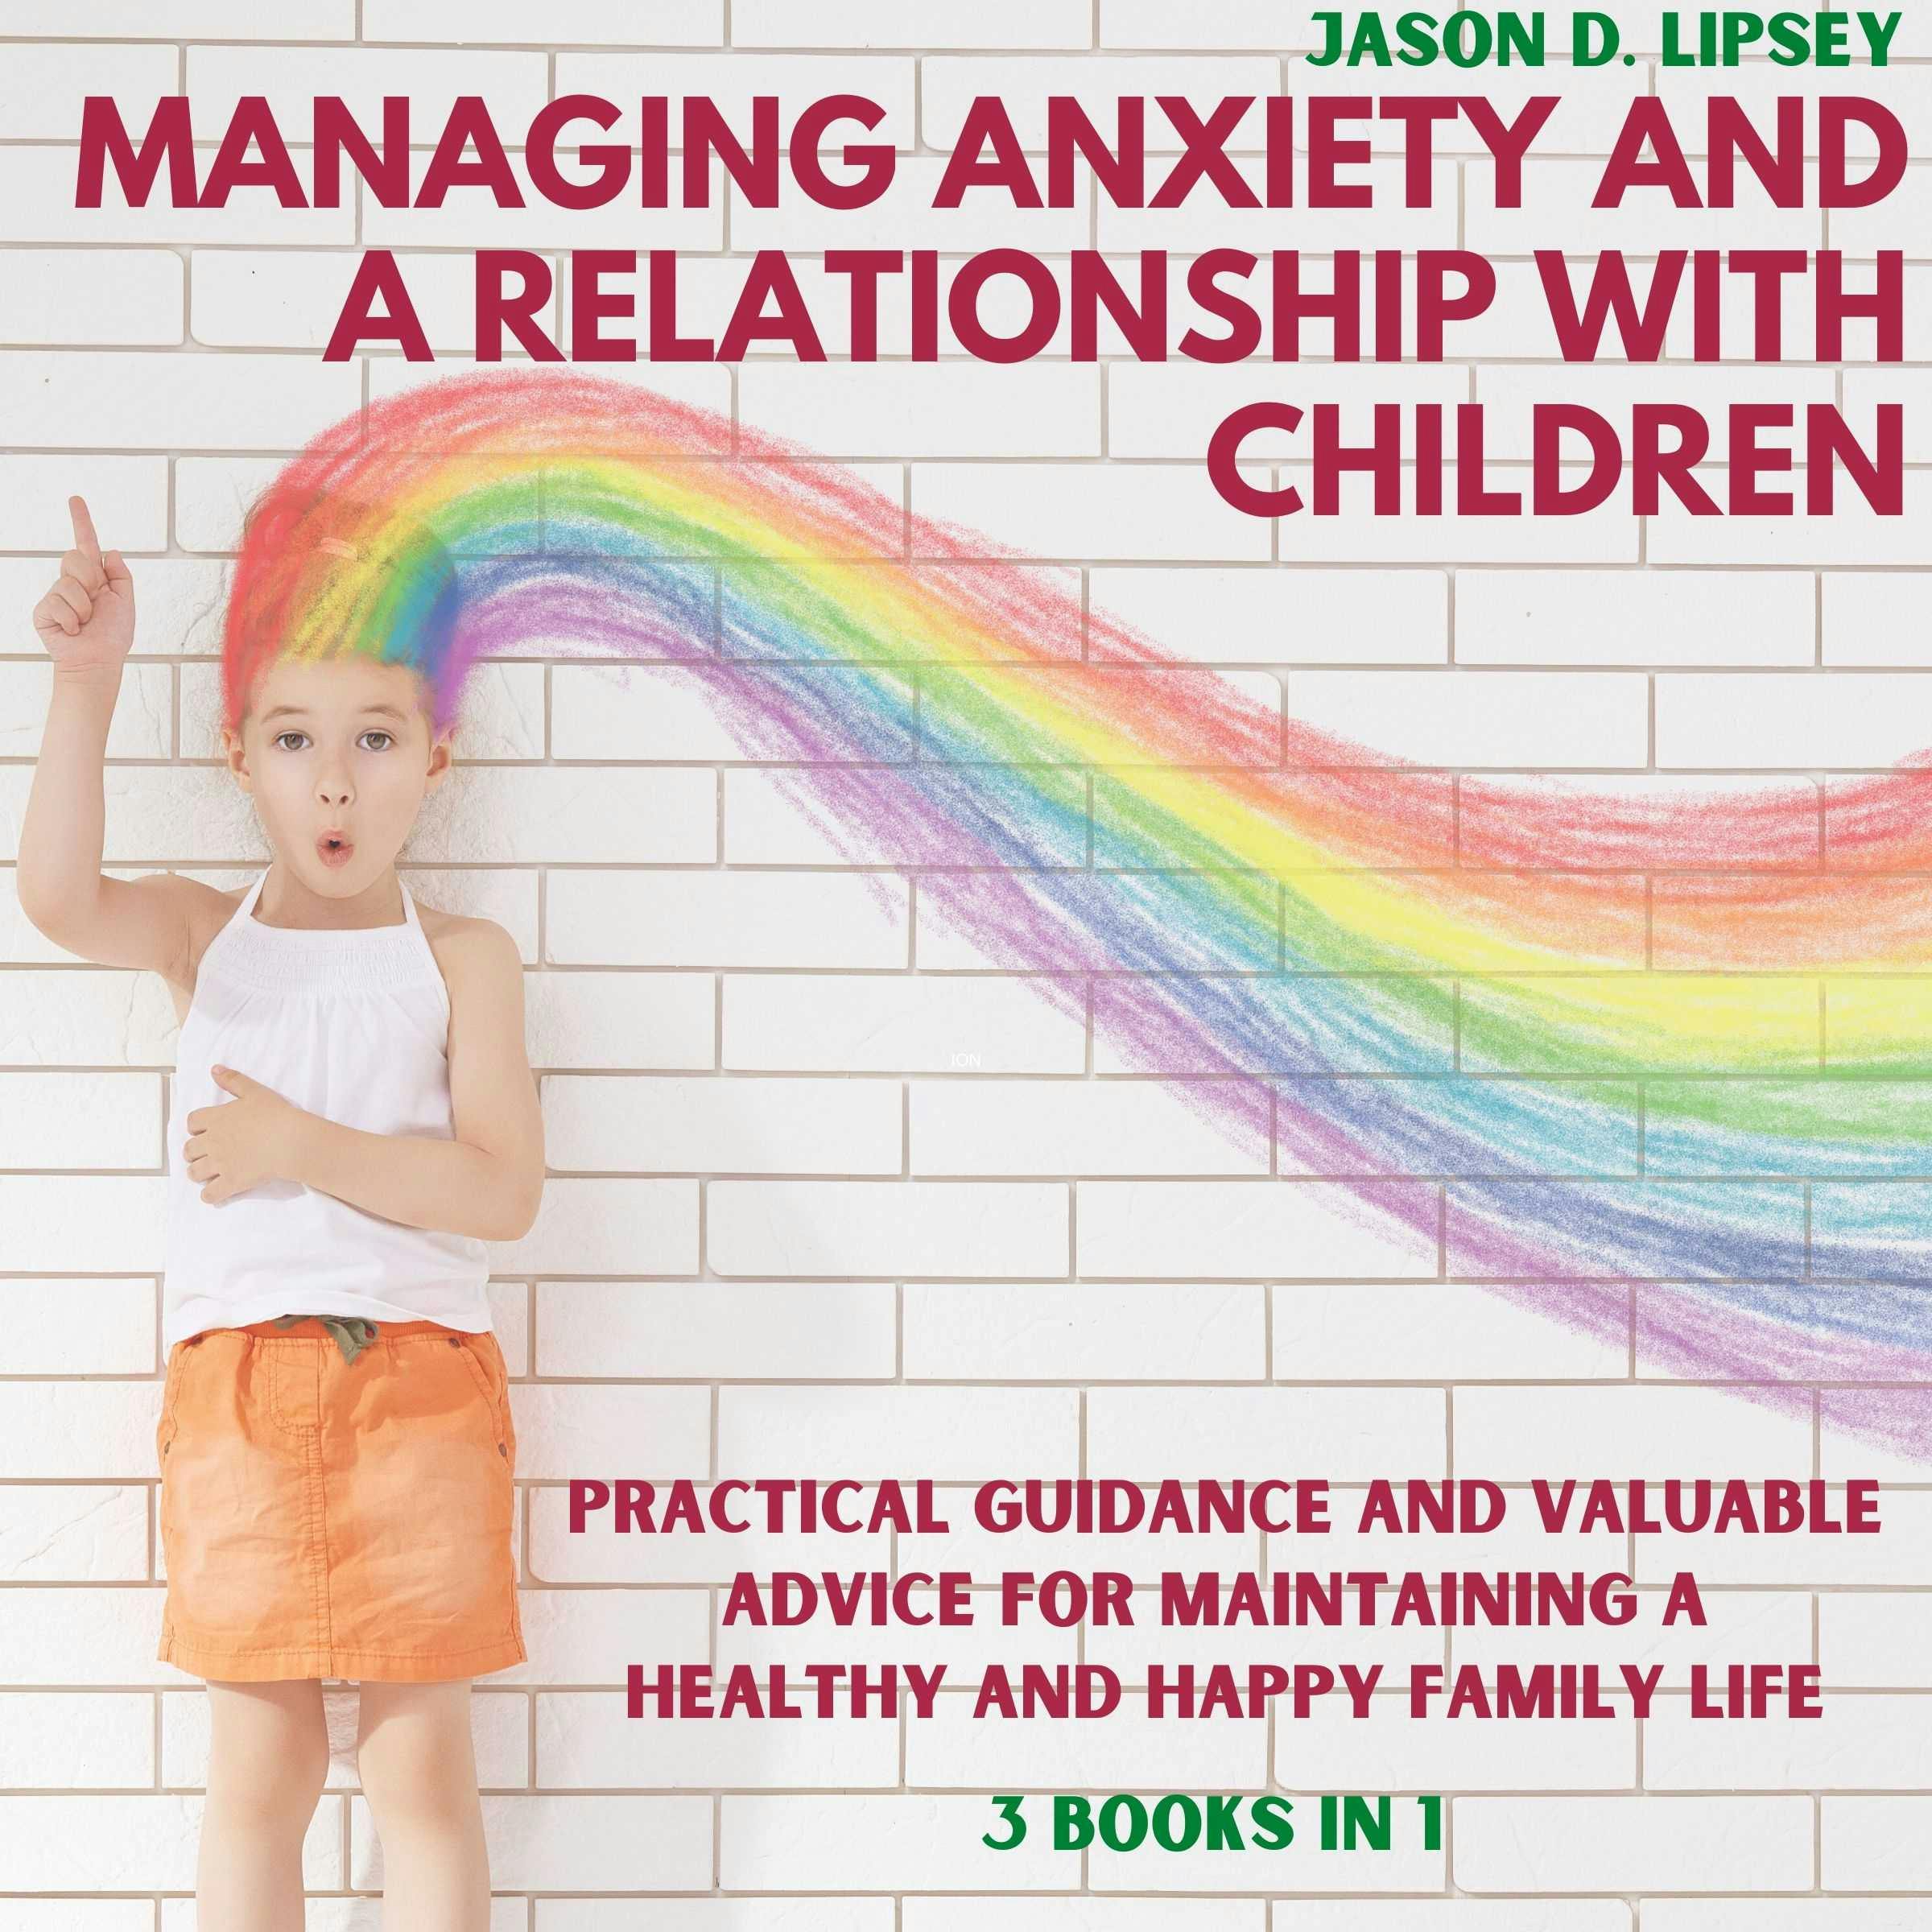 Managing Anxiety and a Relationship with Children: Practical Guidance and Valuable Advice for Maintaining a Healthy and Happy Family Life - undefined